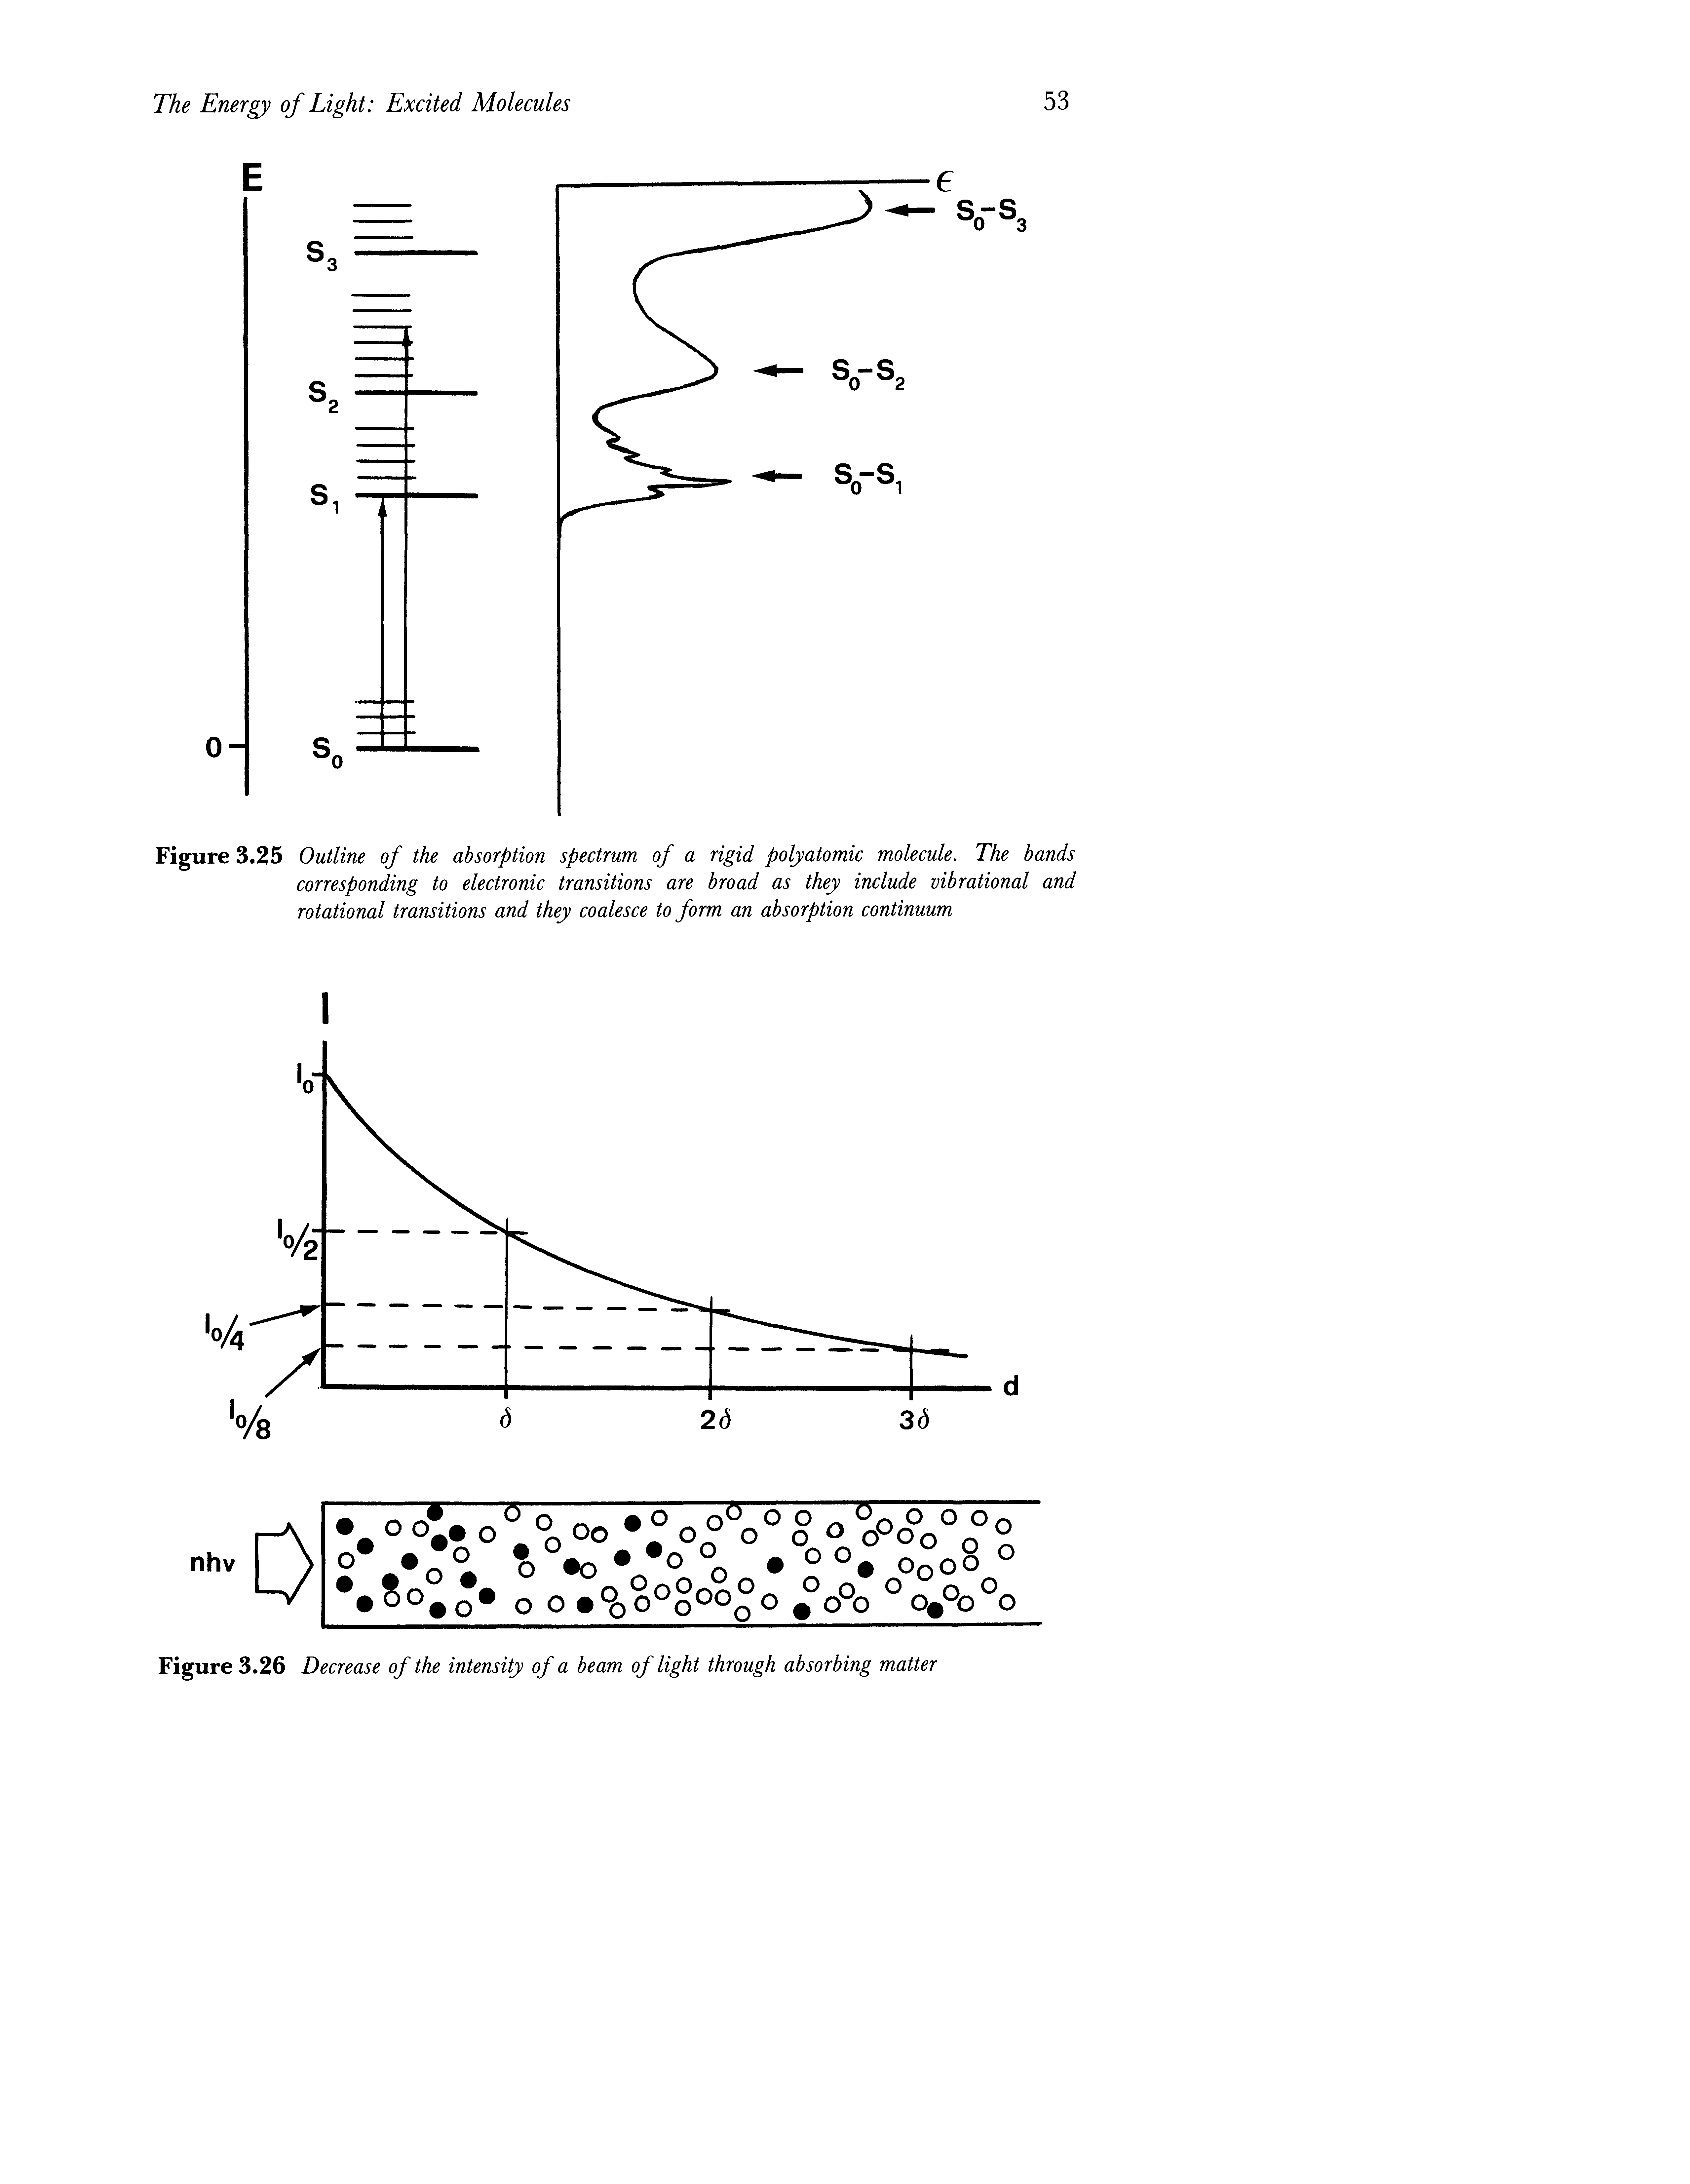 Figure 3.25 Outline of the absorption spectrum of a rigid polyatomic molecule. The bands corresponding to electronic transitions are broad as they include vibrational and rotational transitions and they coalesce to form an absorption continuum...